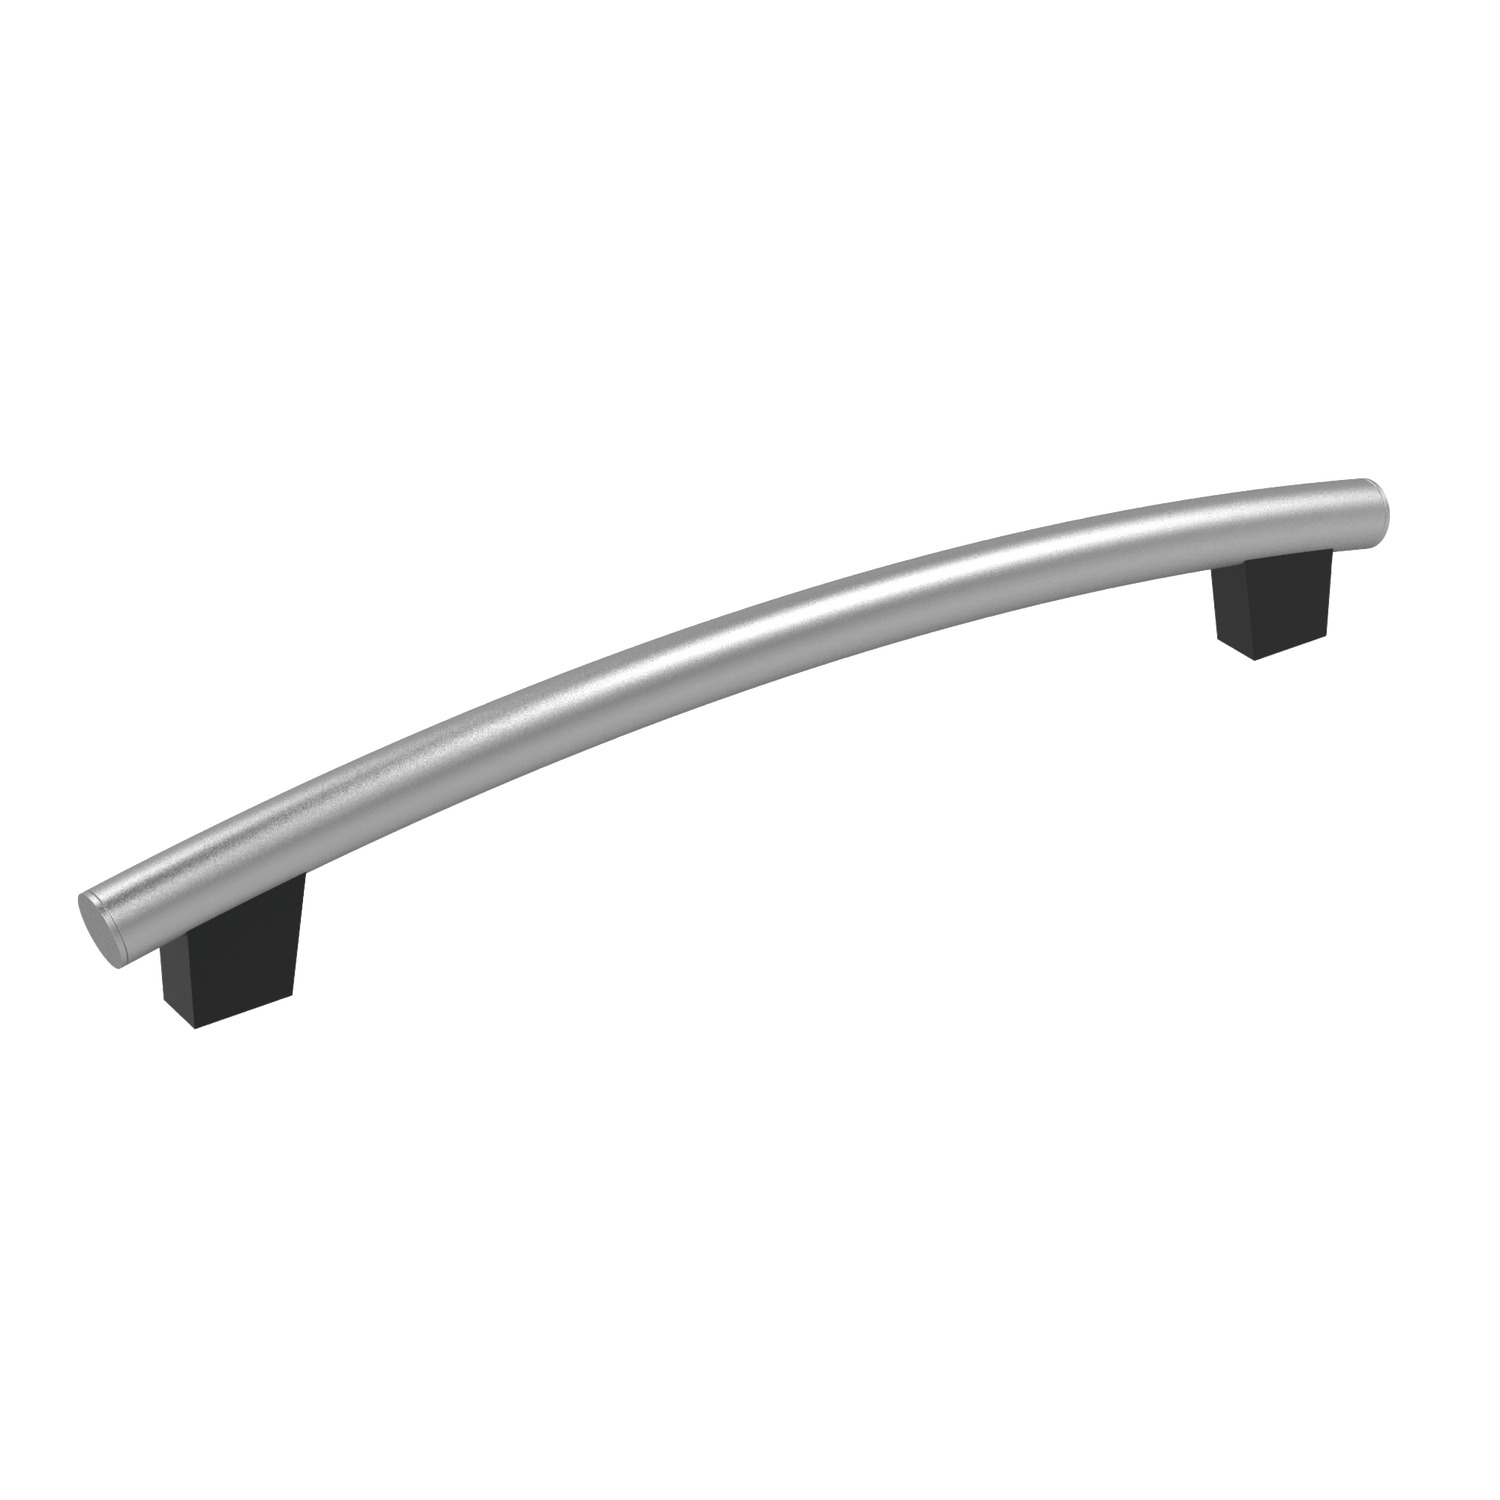 Product 79310, Handles curved / 